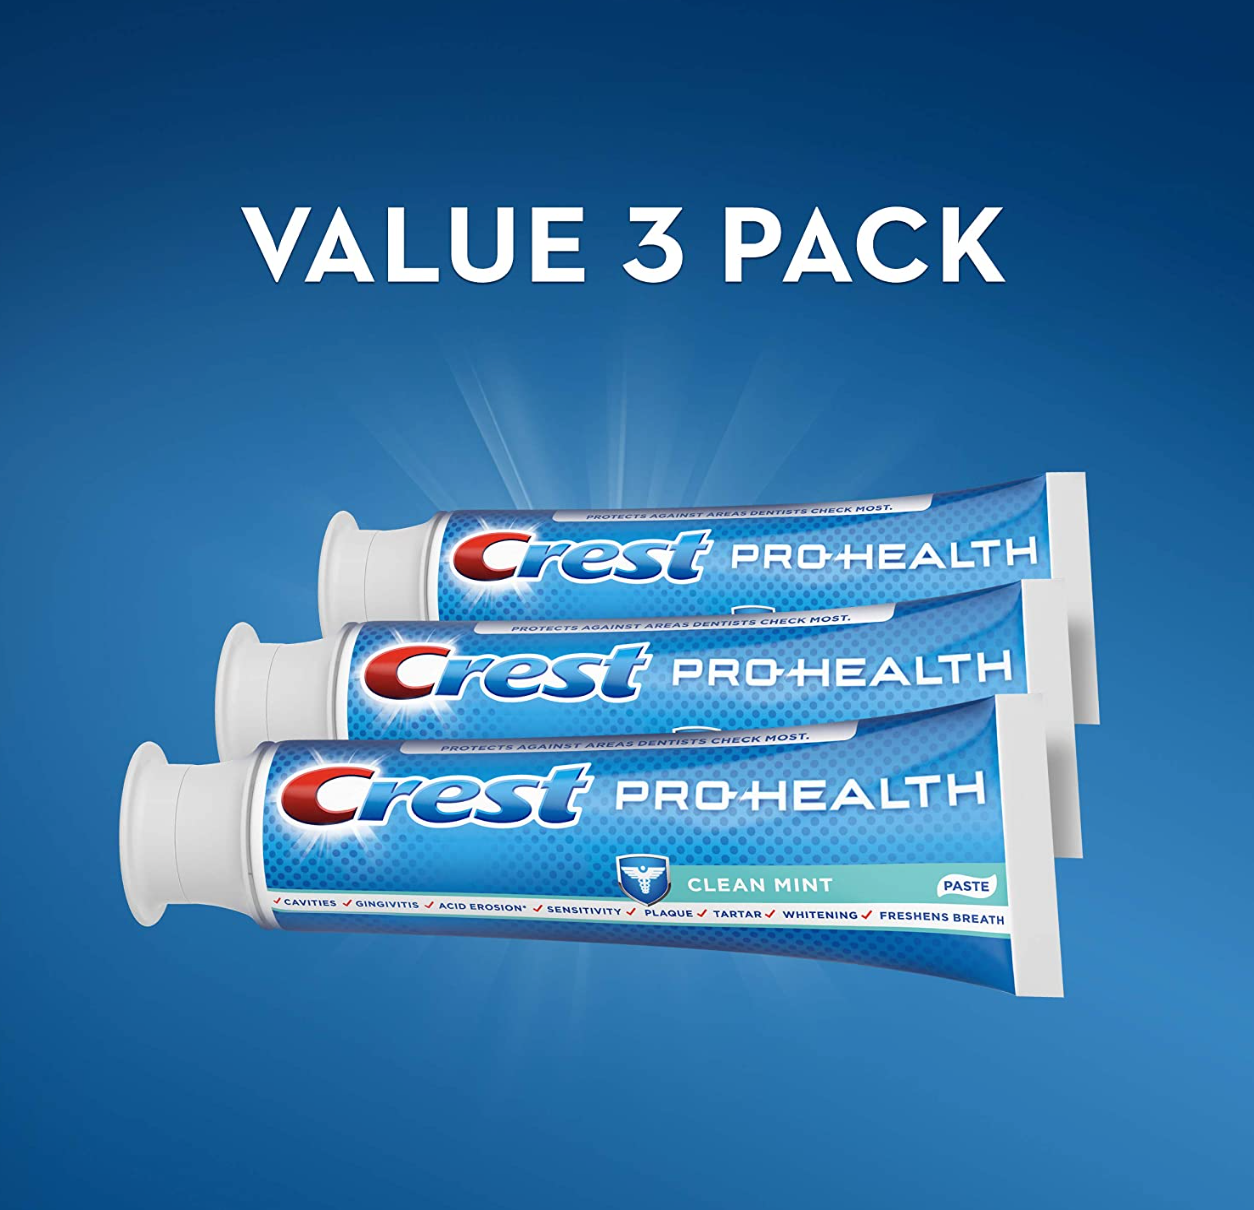 Crest Pro-Health Smooth Formula Toothpaste, Clean Mint, 4.6 oz, Pack of 3 (Packaging May Vary)